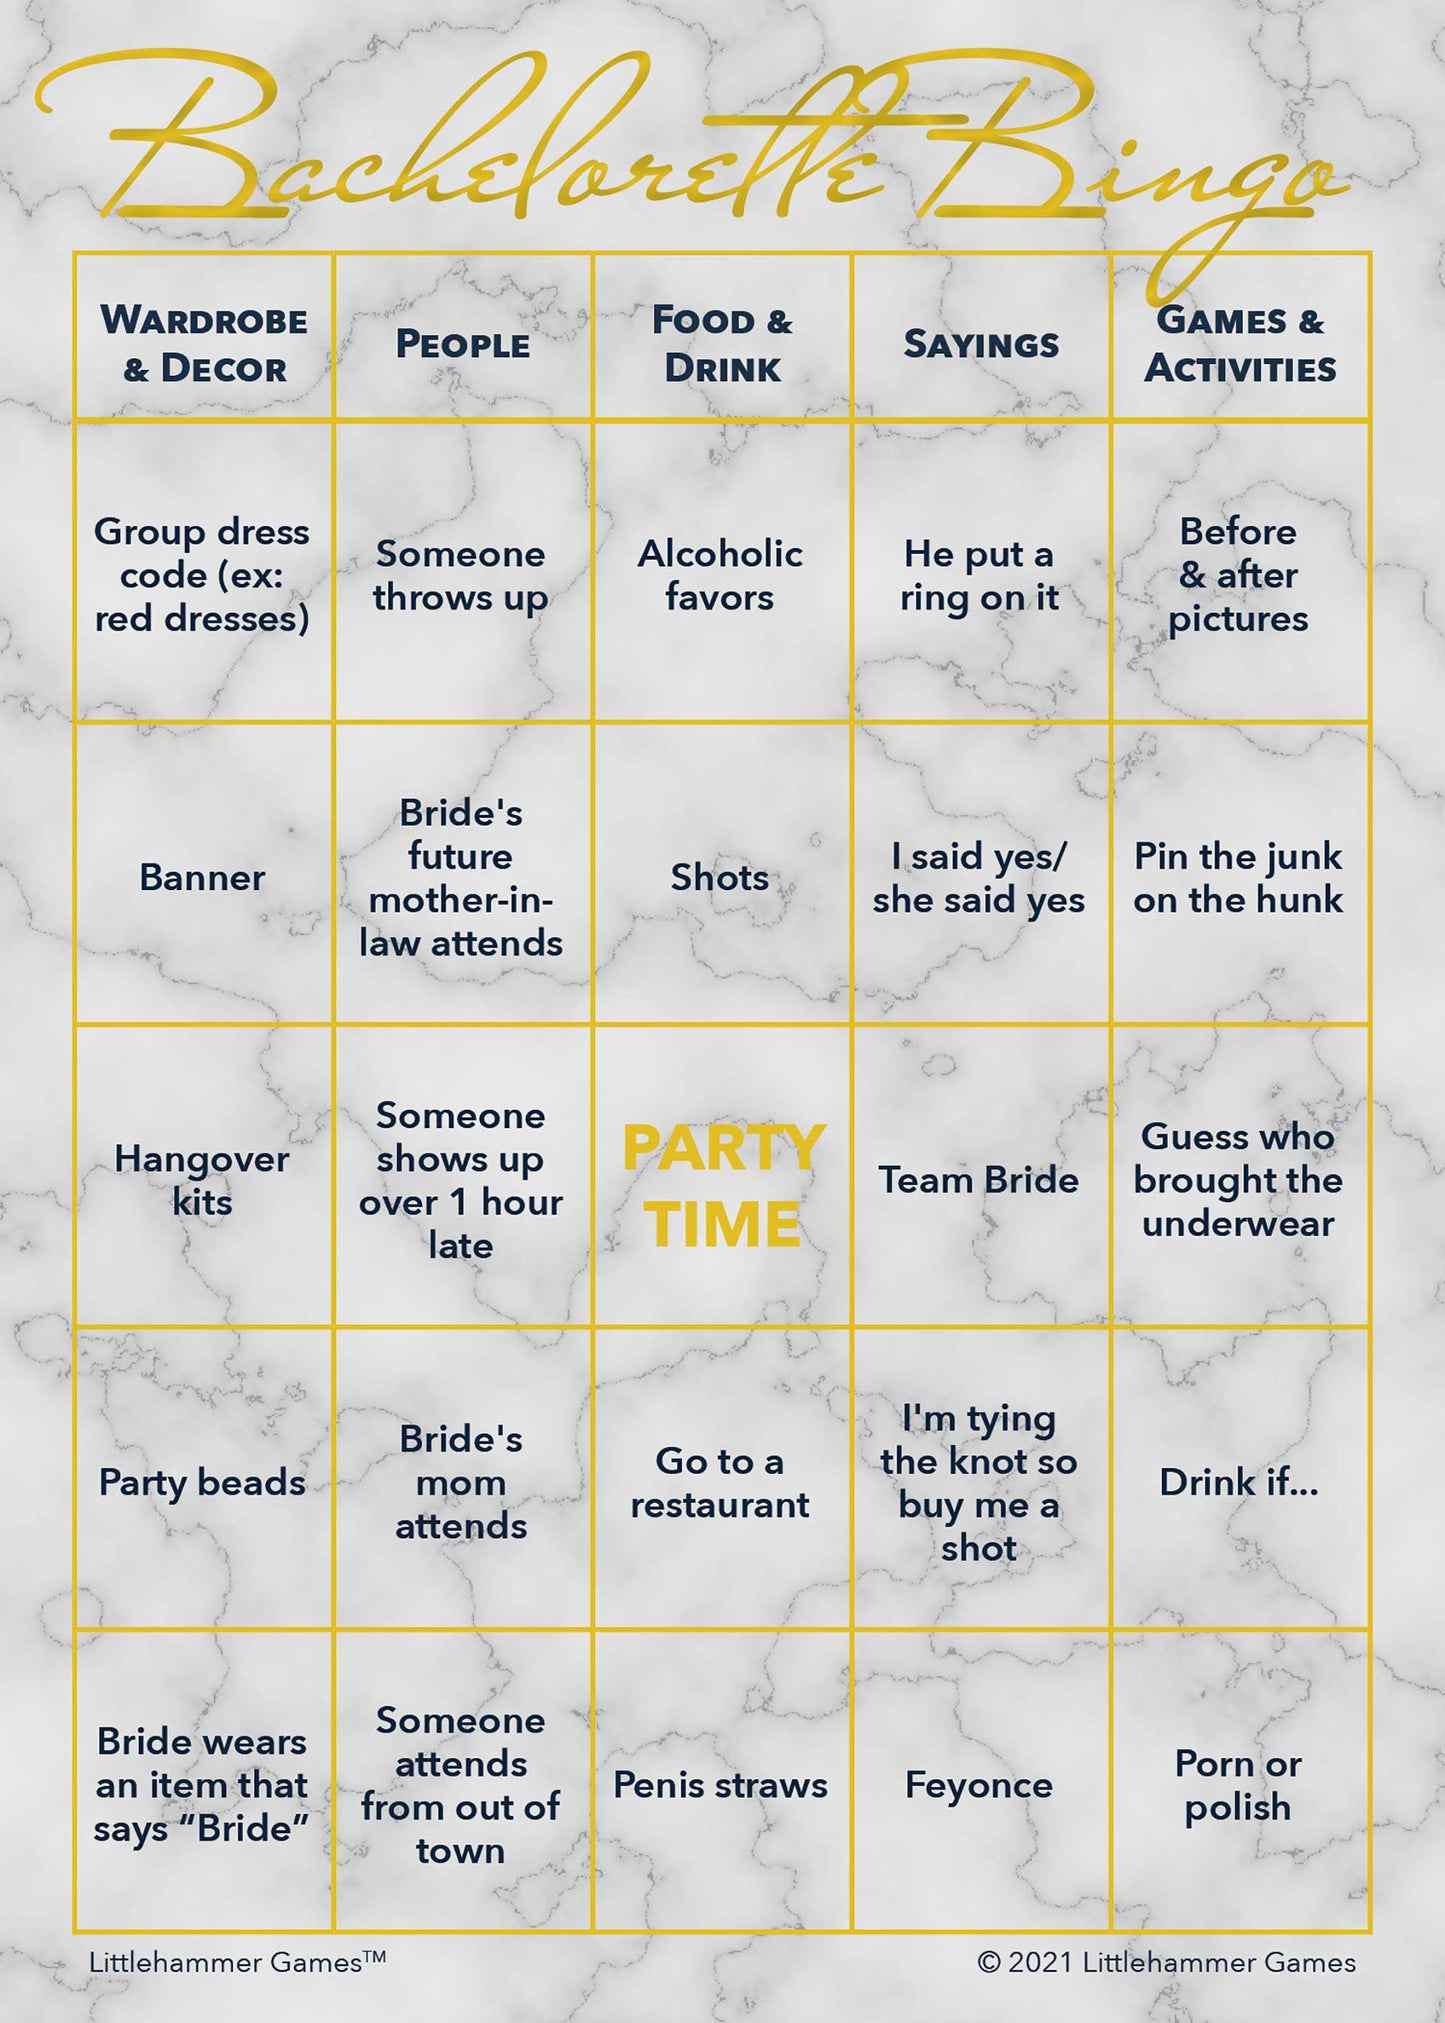 Bachelorette Bingo game card with gold text on a marble background